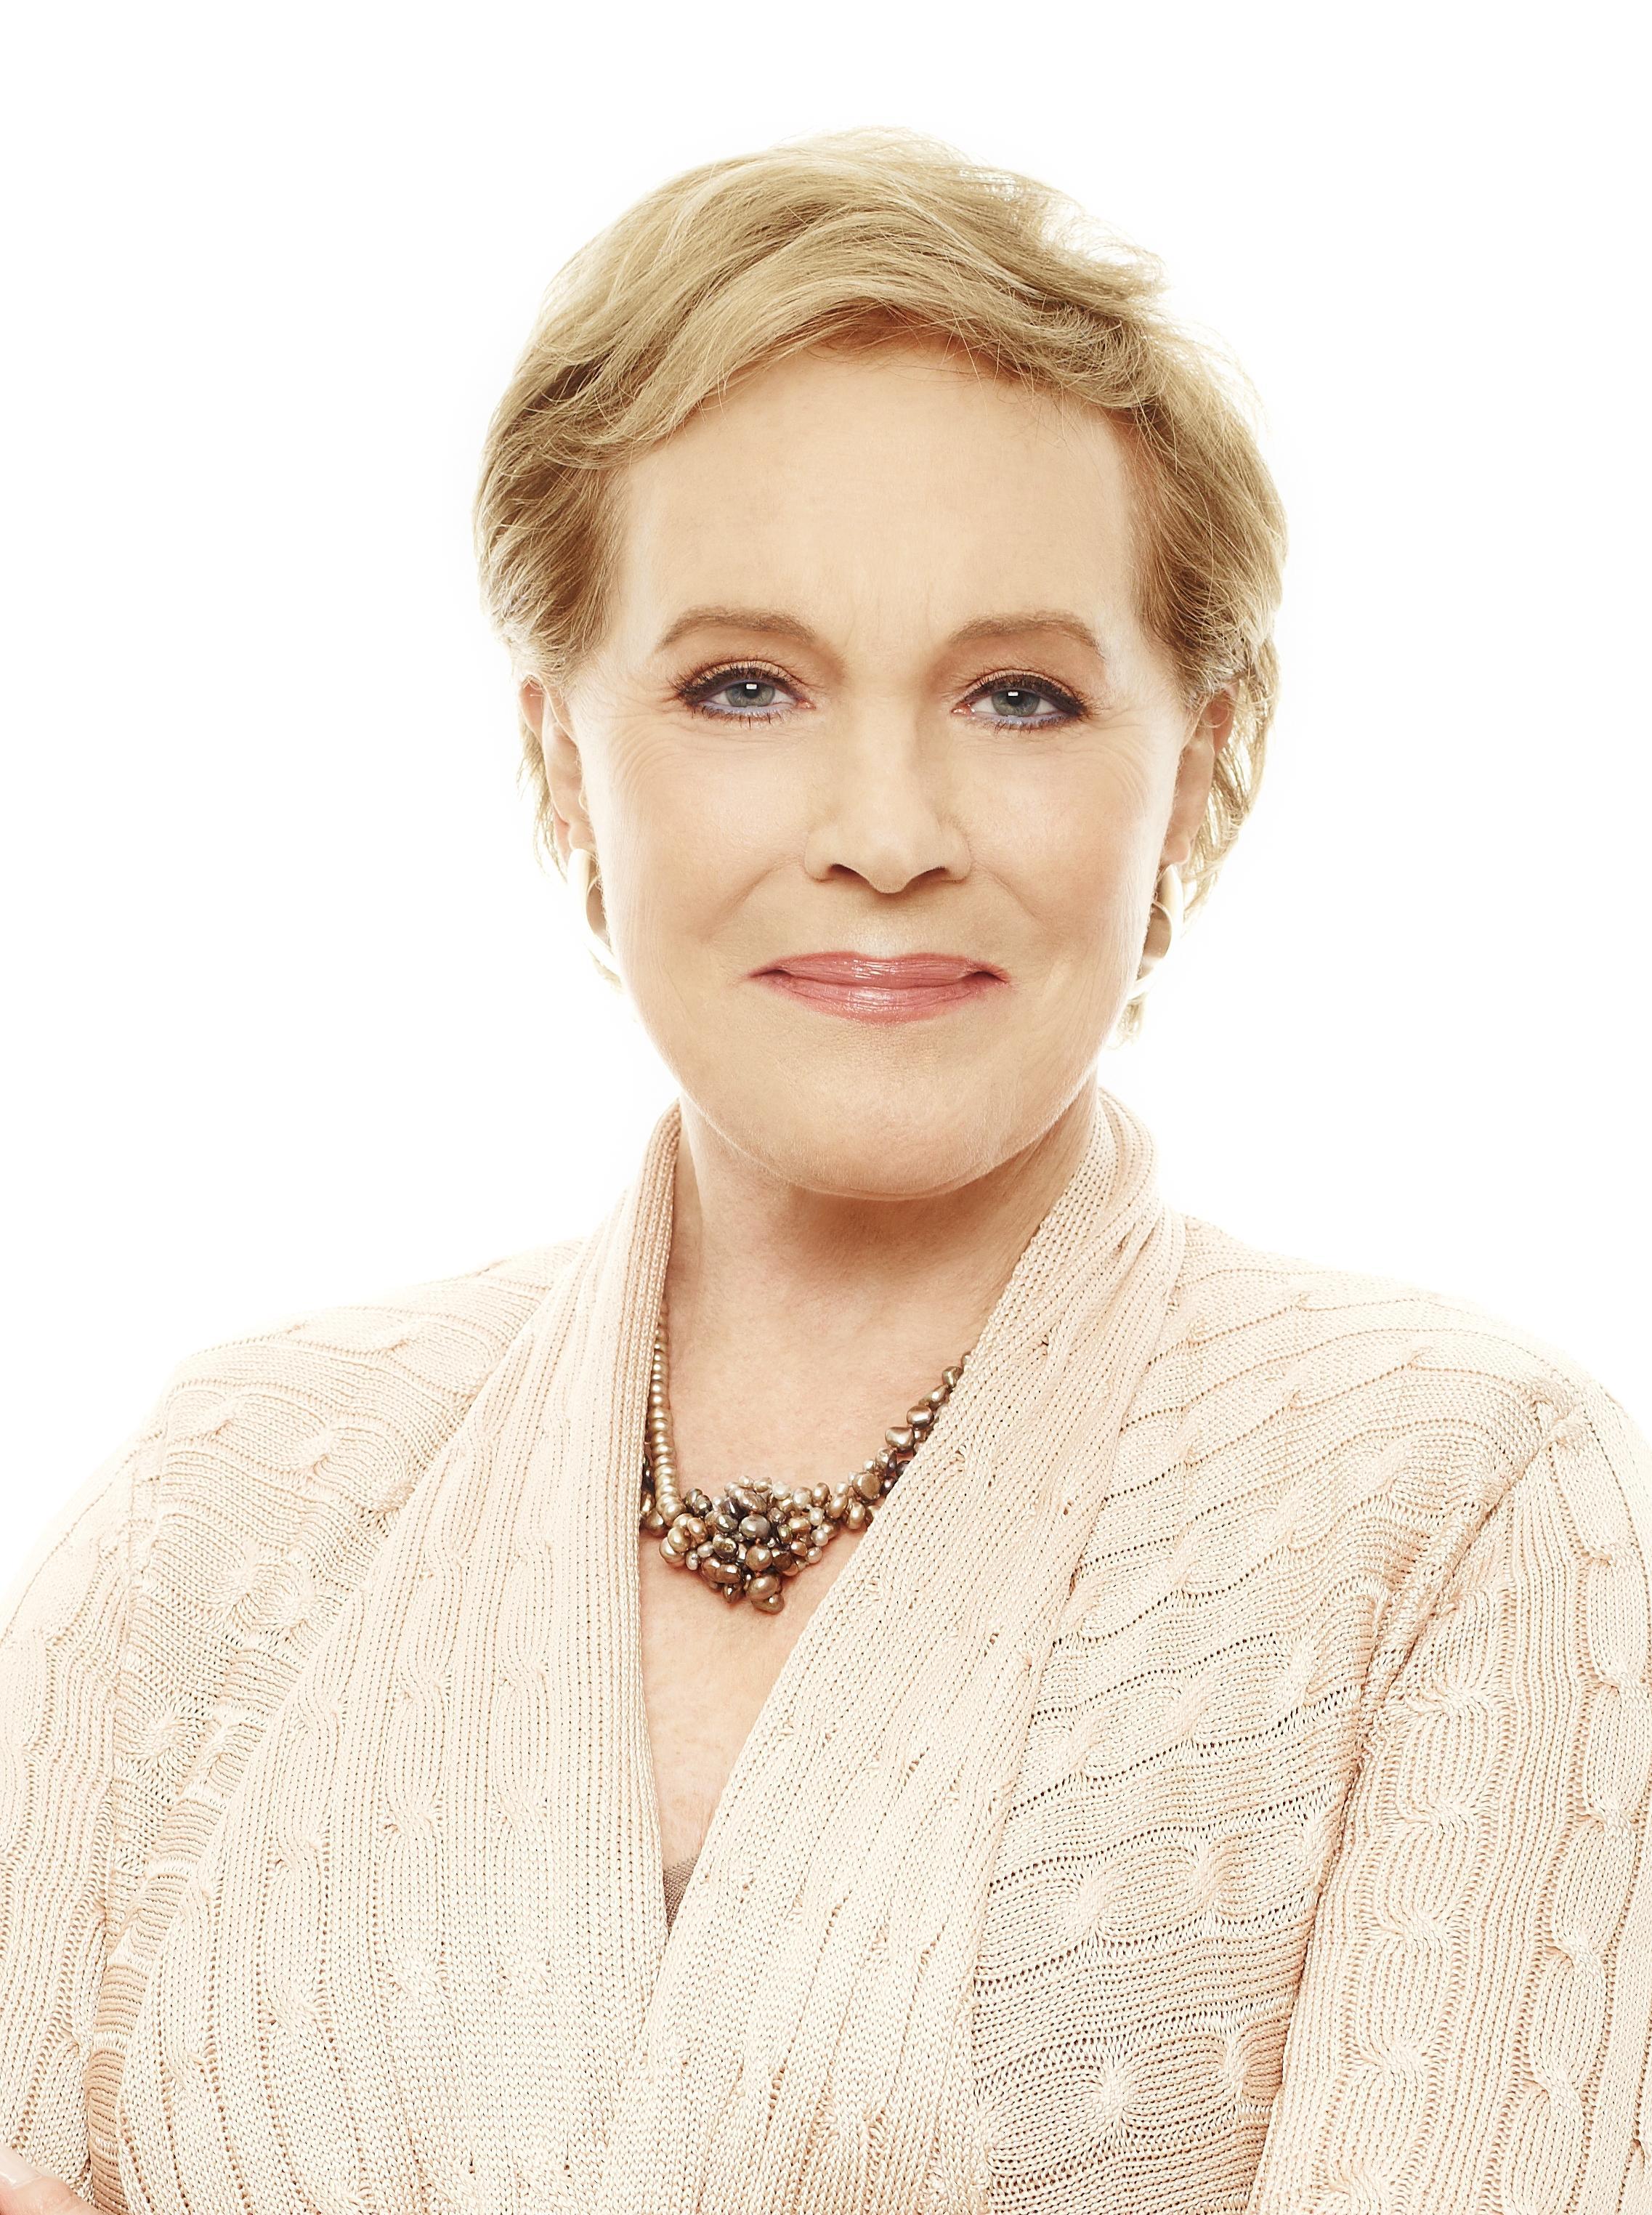 Julie Andrews Wallpaper for PC. Full HD Picture